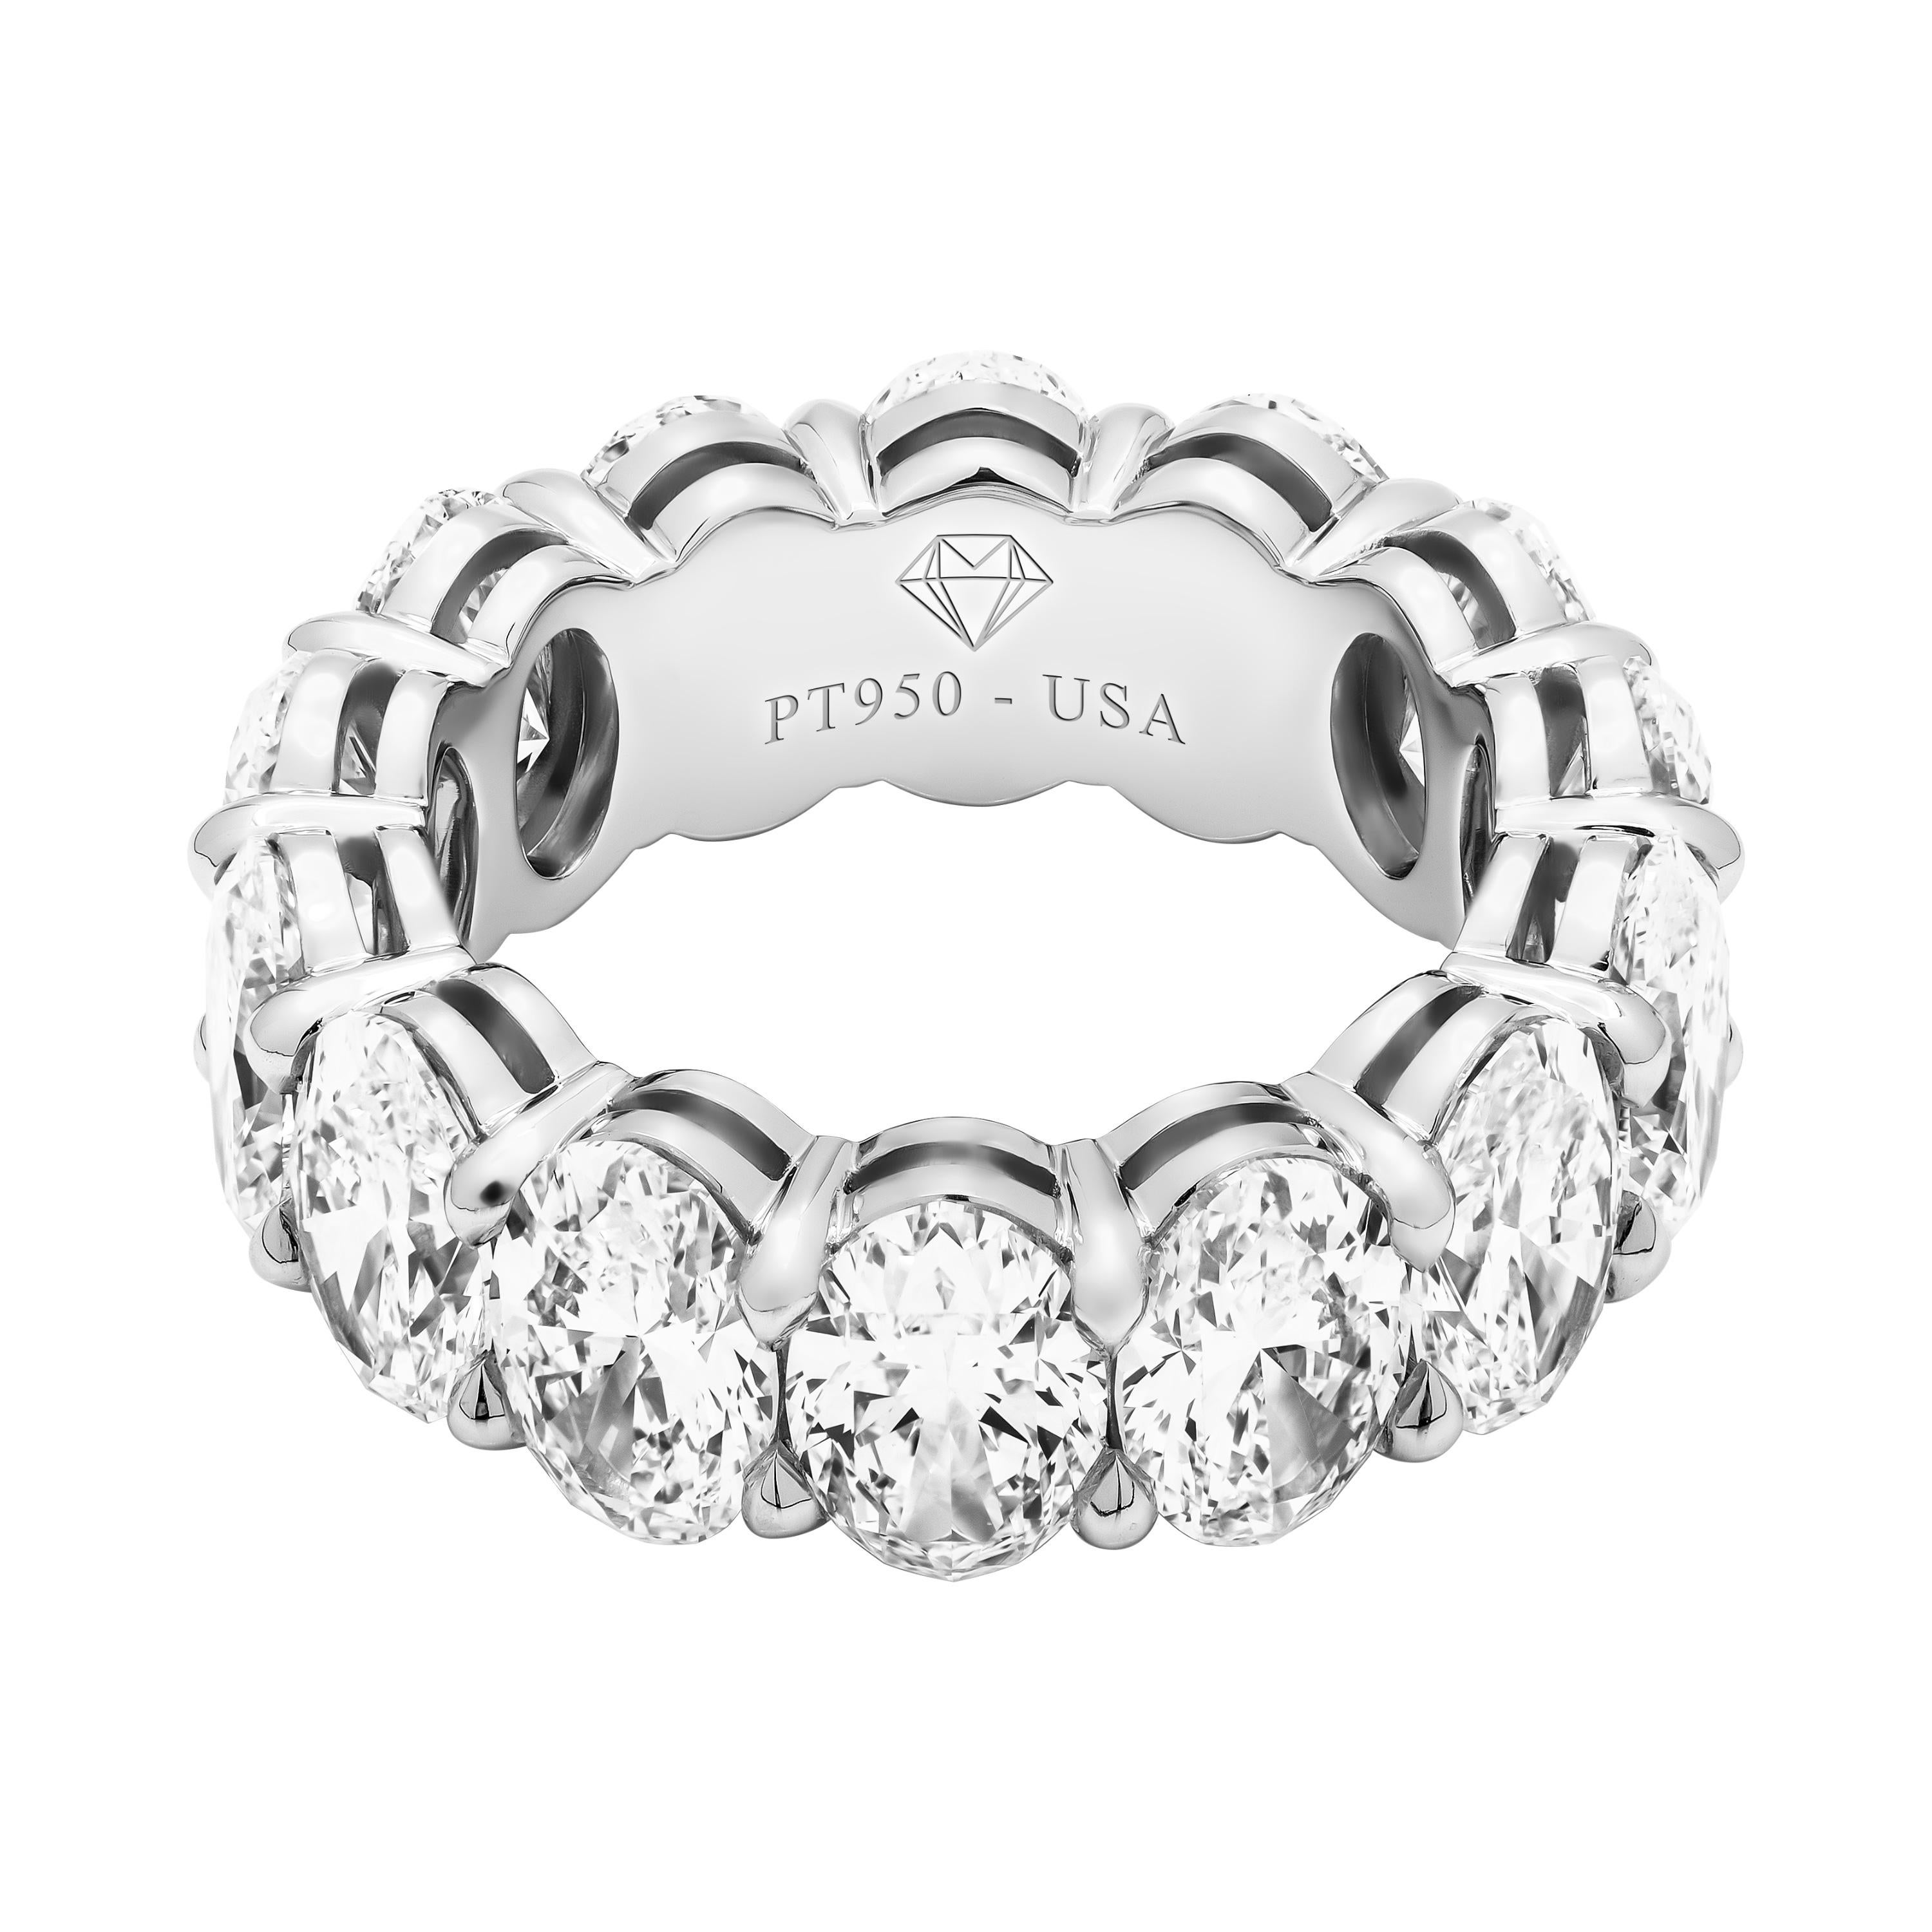 Oval Cut Anniversary Band in Platinum 9.99ct
The most wanted piece of jewelry in 2020, timeless, edgy and stylish
Handcrafted Band , the highest quality of mounting you will find! Delicate yet sturdy 
Mounted in Platinum 950, 14 oval cut diamonds